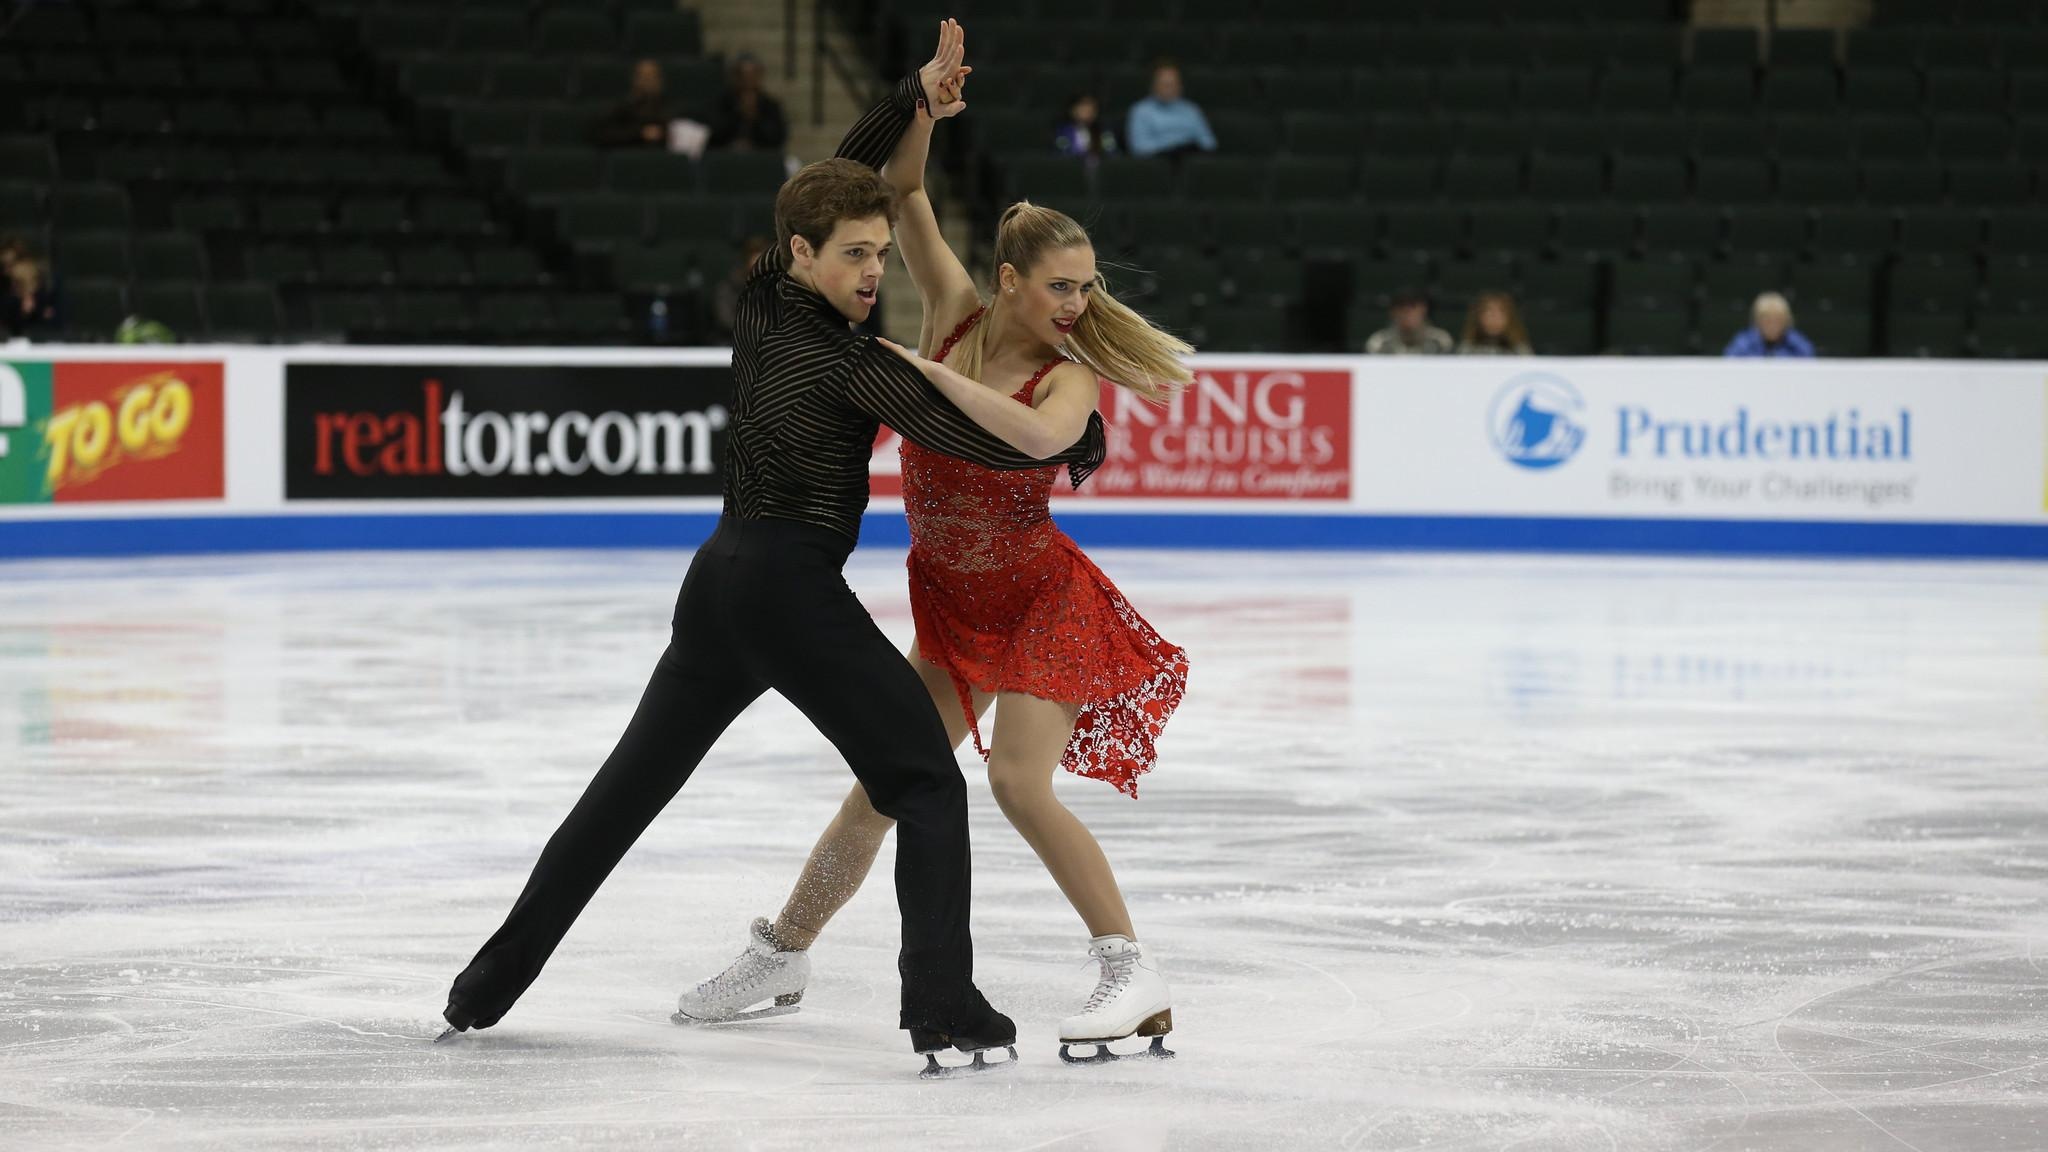 Pair Skating: Ice dancers, Michael Parsons and Rachel Parsons, 2016 Prudential U.S. Figure Skating Championships. 2050x1160 HD Background.